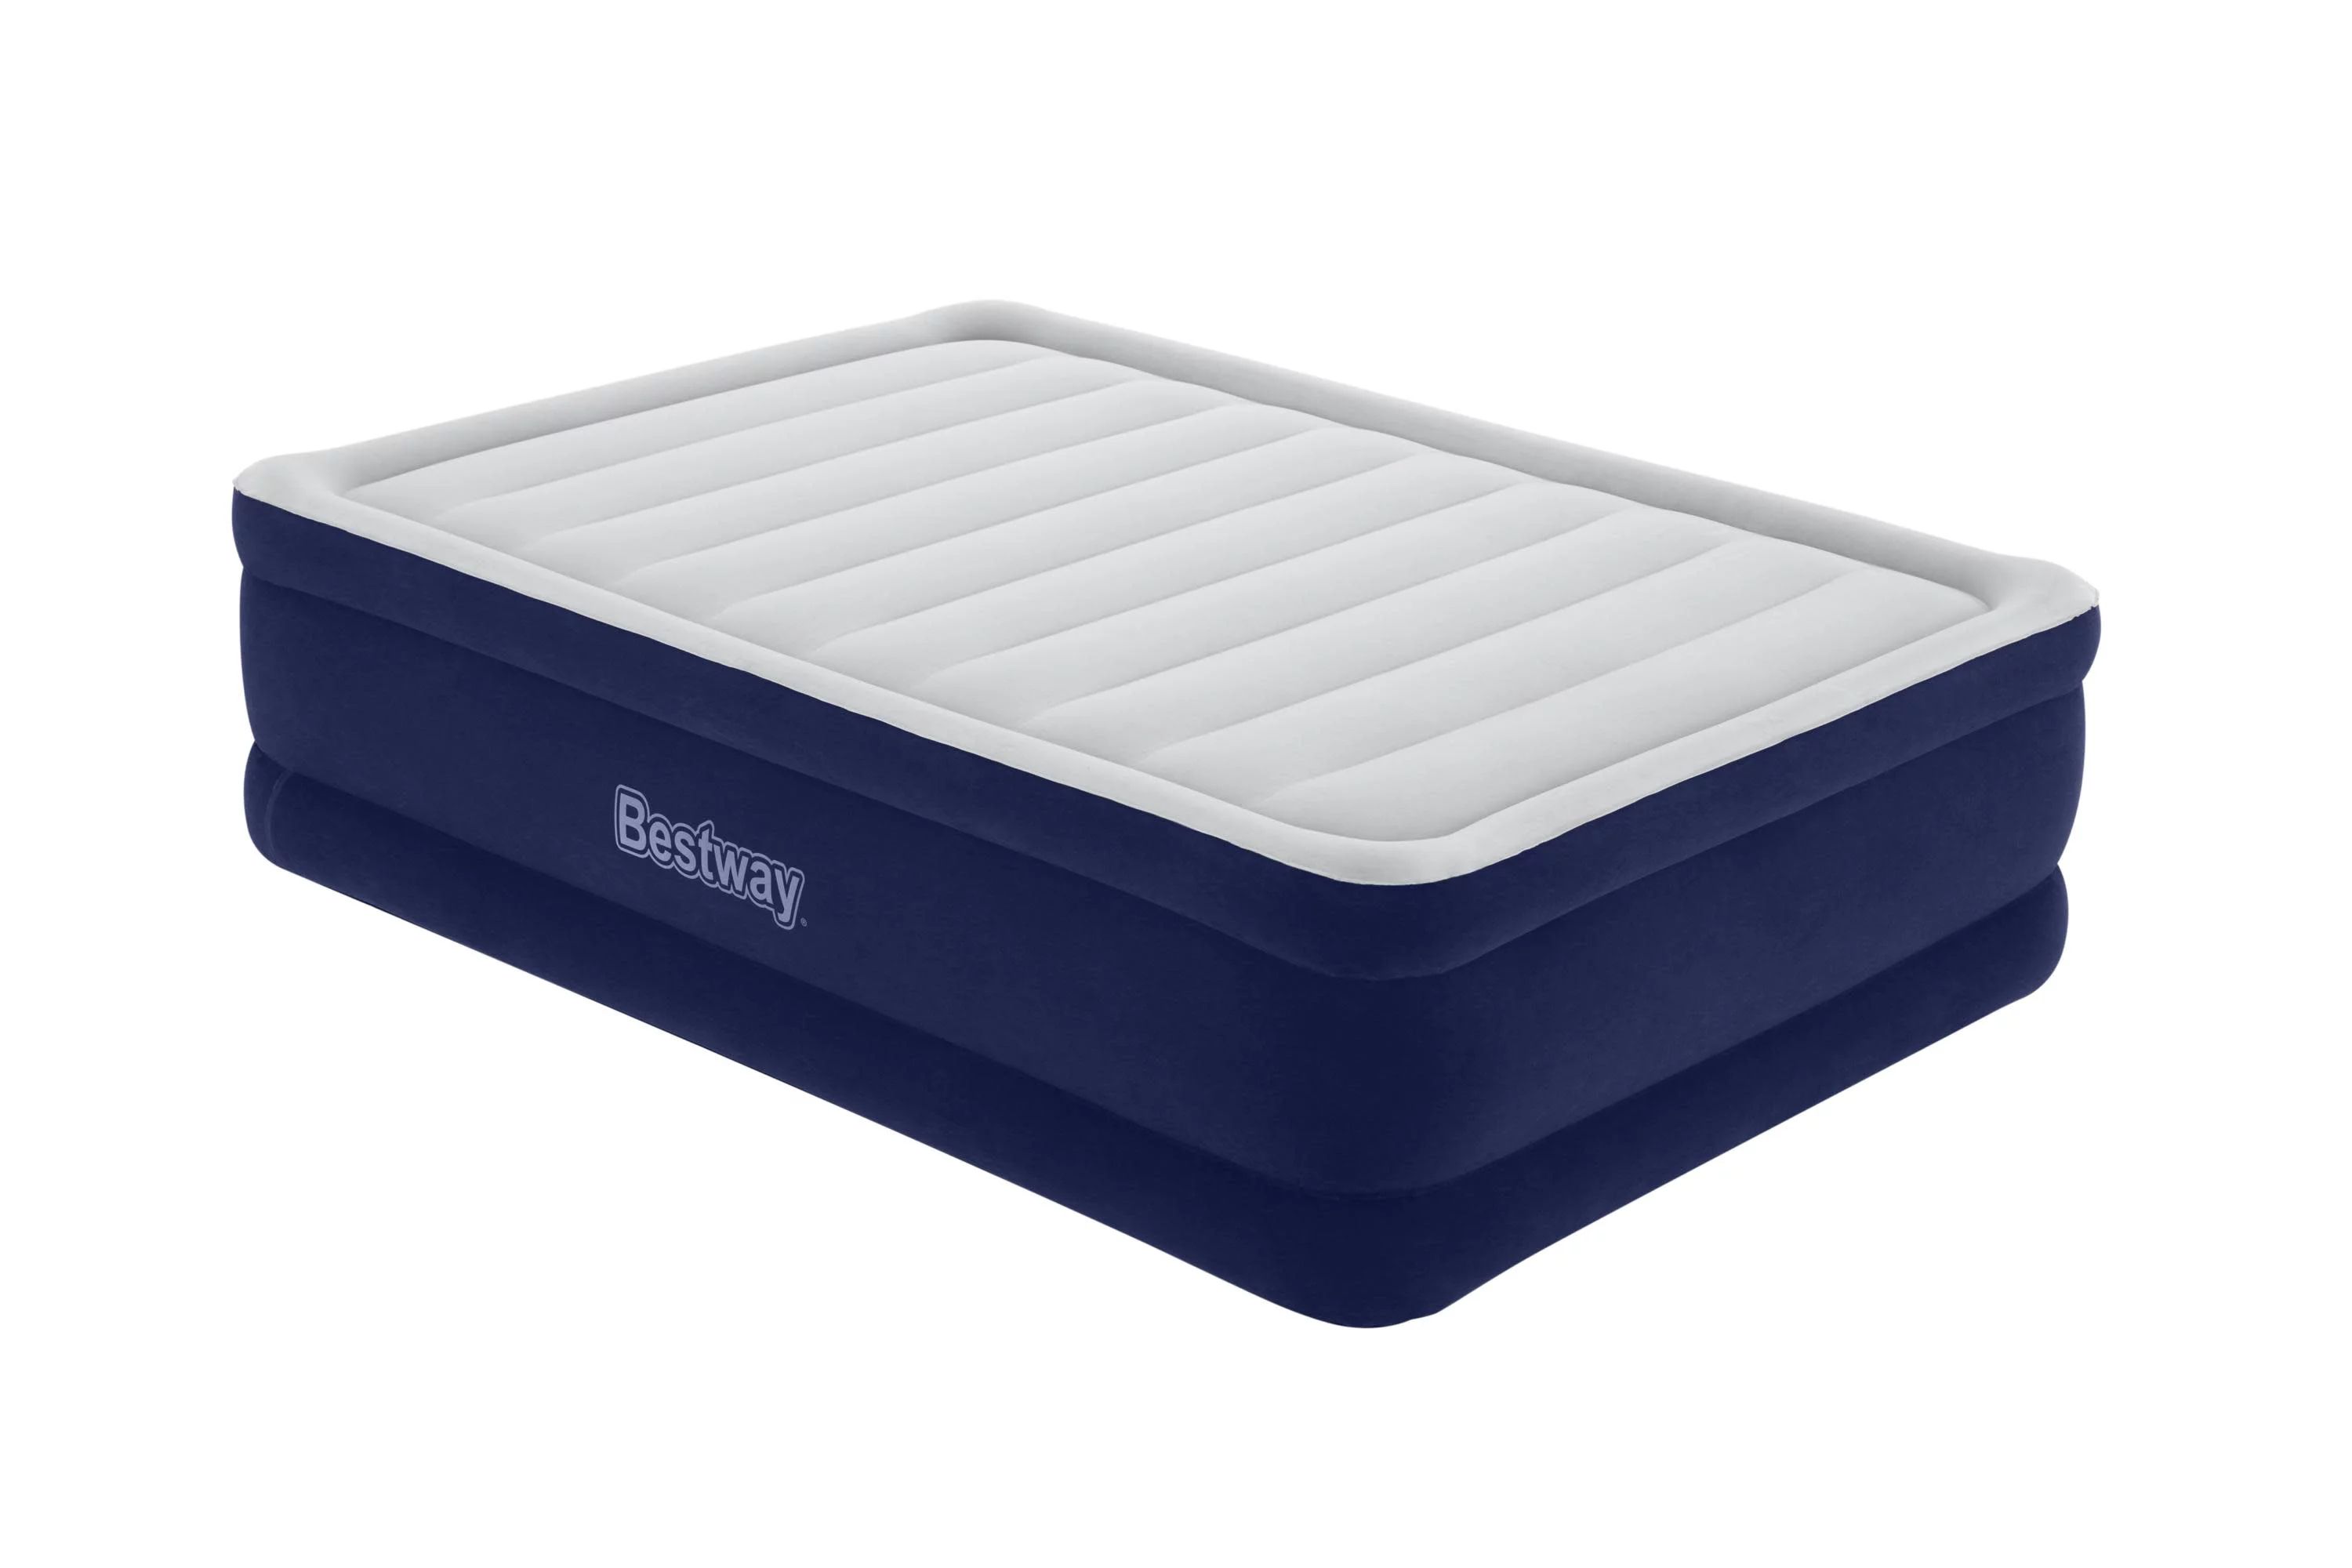 Bestway Tritech™ Air Mattress Queen 22" with Built-in AC Pump and Antimicrobial Coating | Walmart (US)